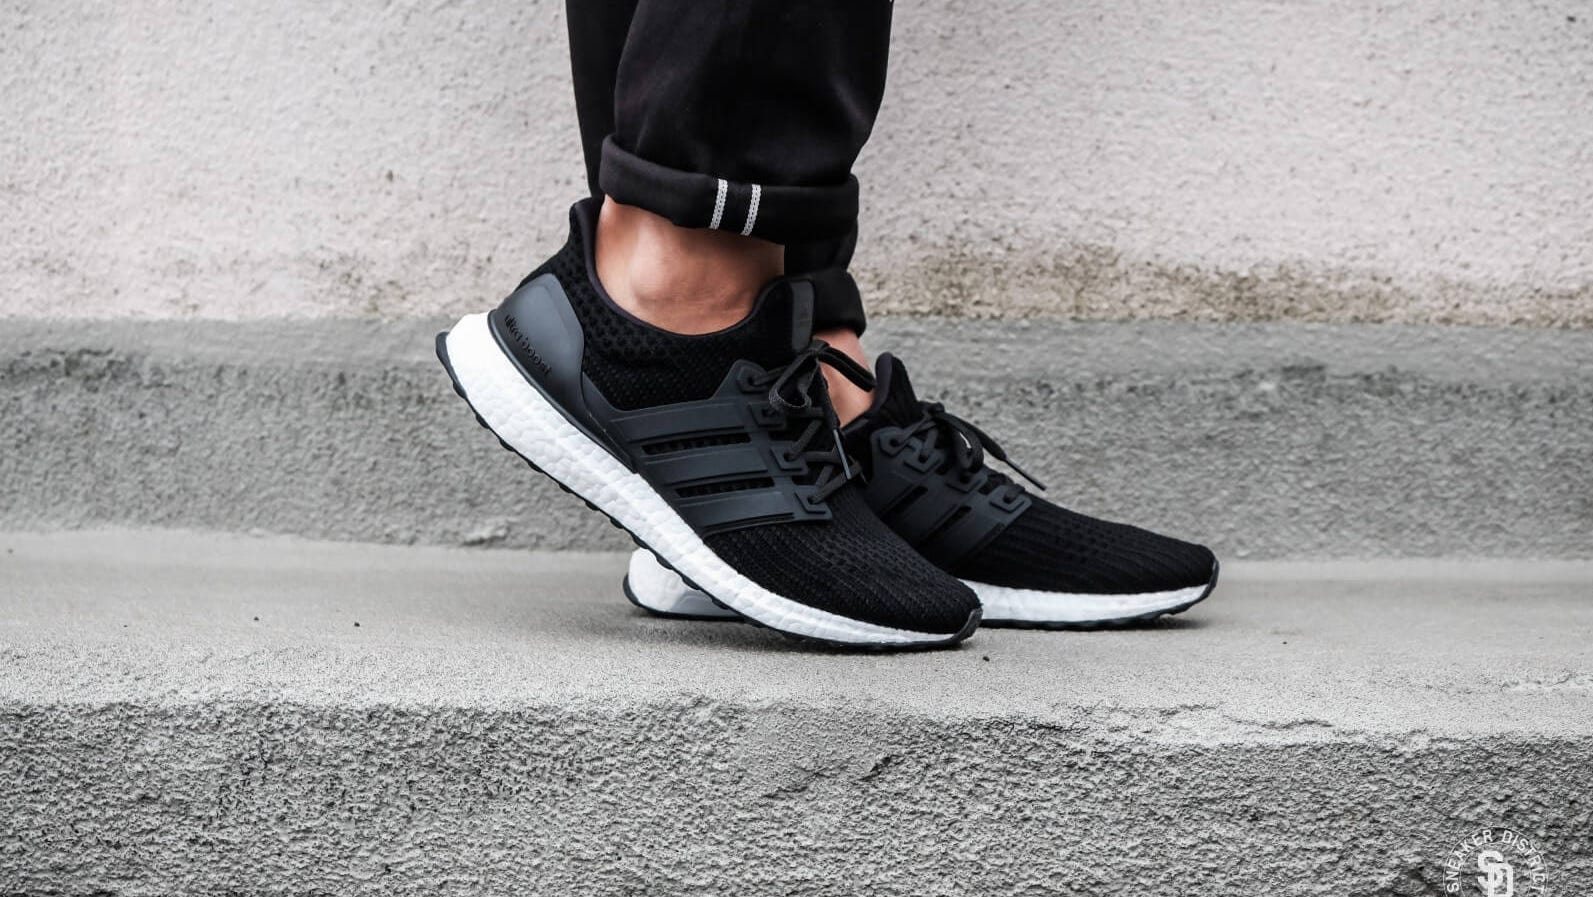 adidas promo code: Get extra 25% off discounted items with this